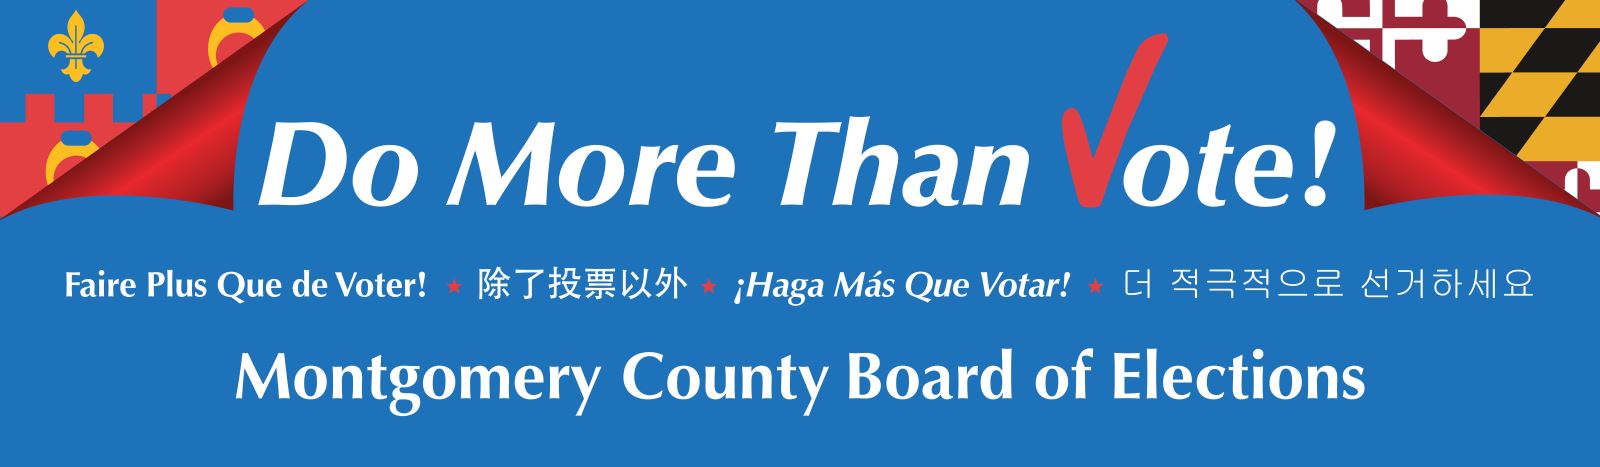 Do more than vote! Montgomery County Board of Elections